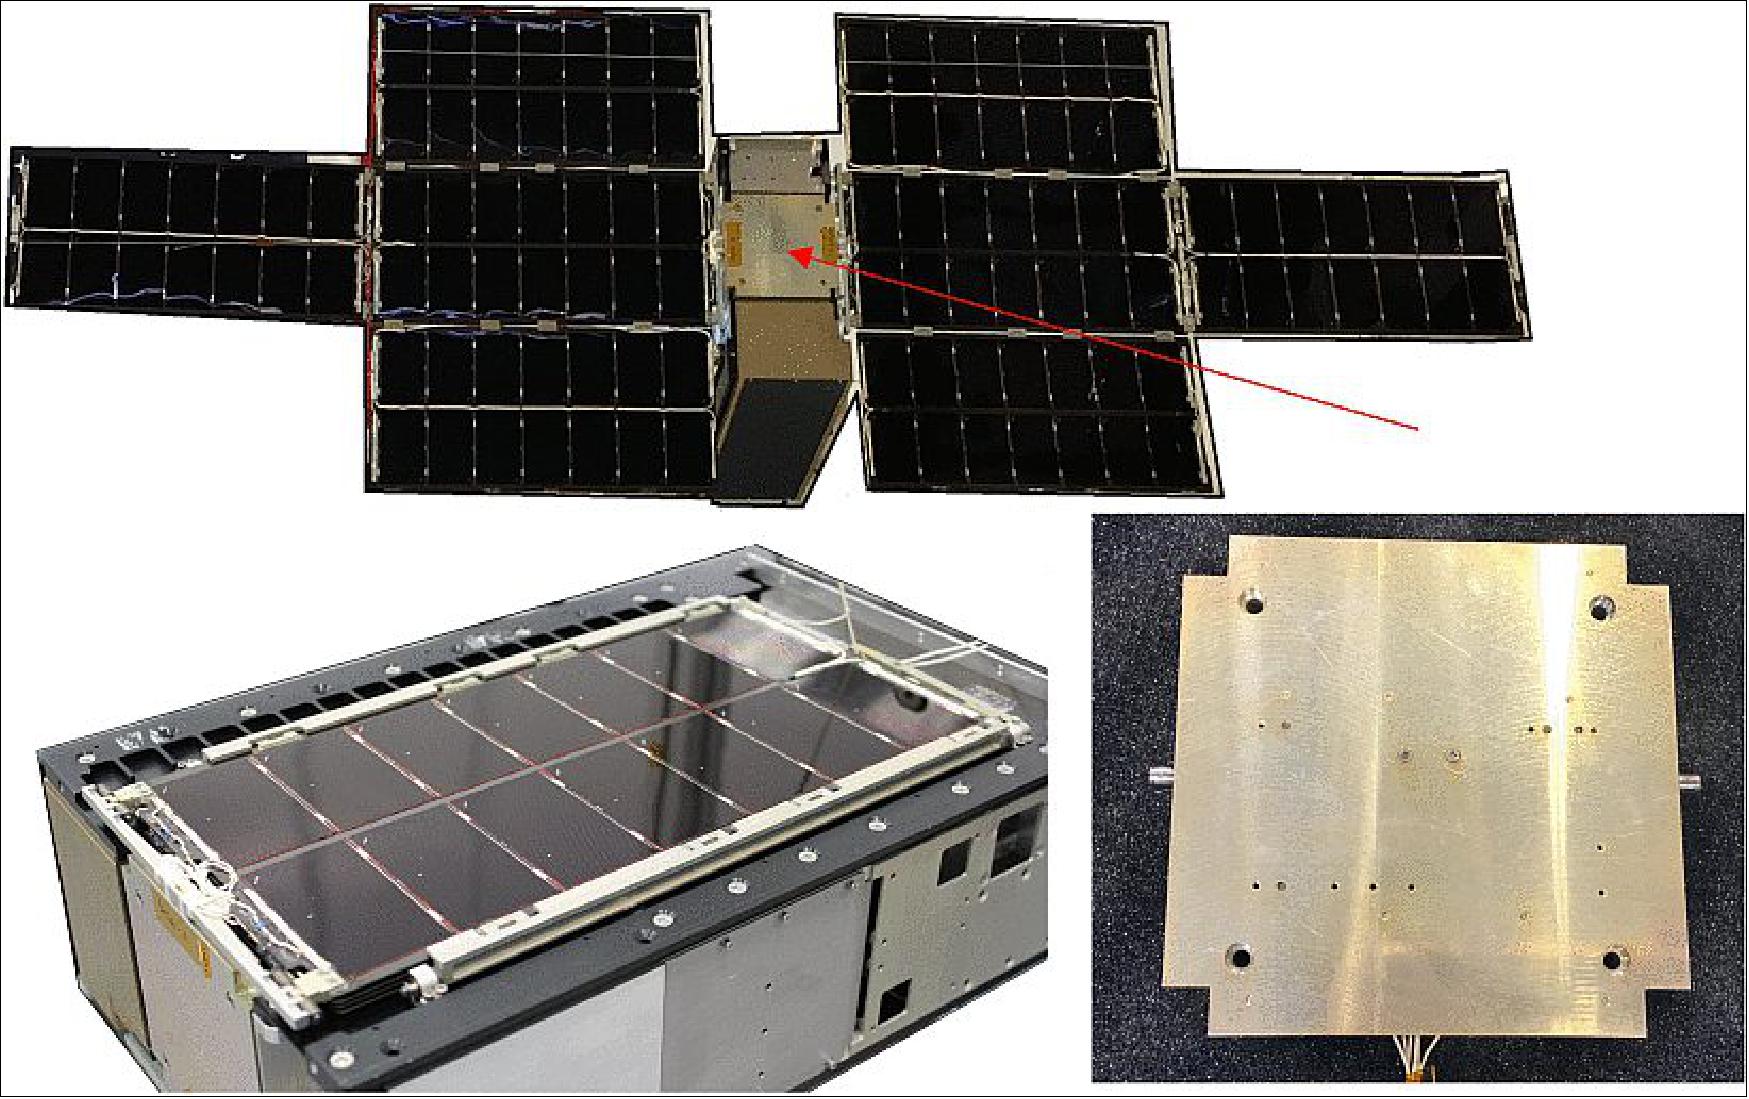 Figure 8: MMA design LunaH-map solar array. Existing 3-panel wing design (top). Wing and launch restraint scaled for stowed requirements (bottom left). Also showing solar array drive assembly (bottom right). The LunaH-Map eHaWK™ incorporates MMA’s patented CubeSat SADA (Solar Array Drive Assembly). This facilitates higher average orbital power and enables peak power tracking. The SADA features ±180º of actuation, up to 16 signal/power feed-through conductors per wing, and actuation speeds up to 0.188 revolutions per minute (image credit: ASU)